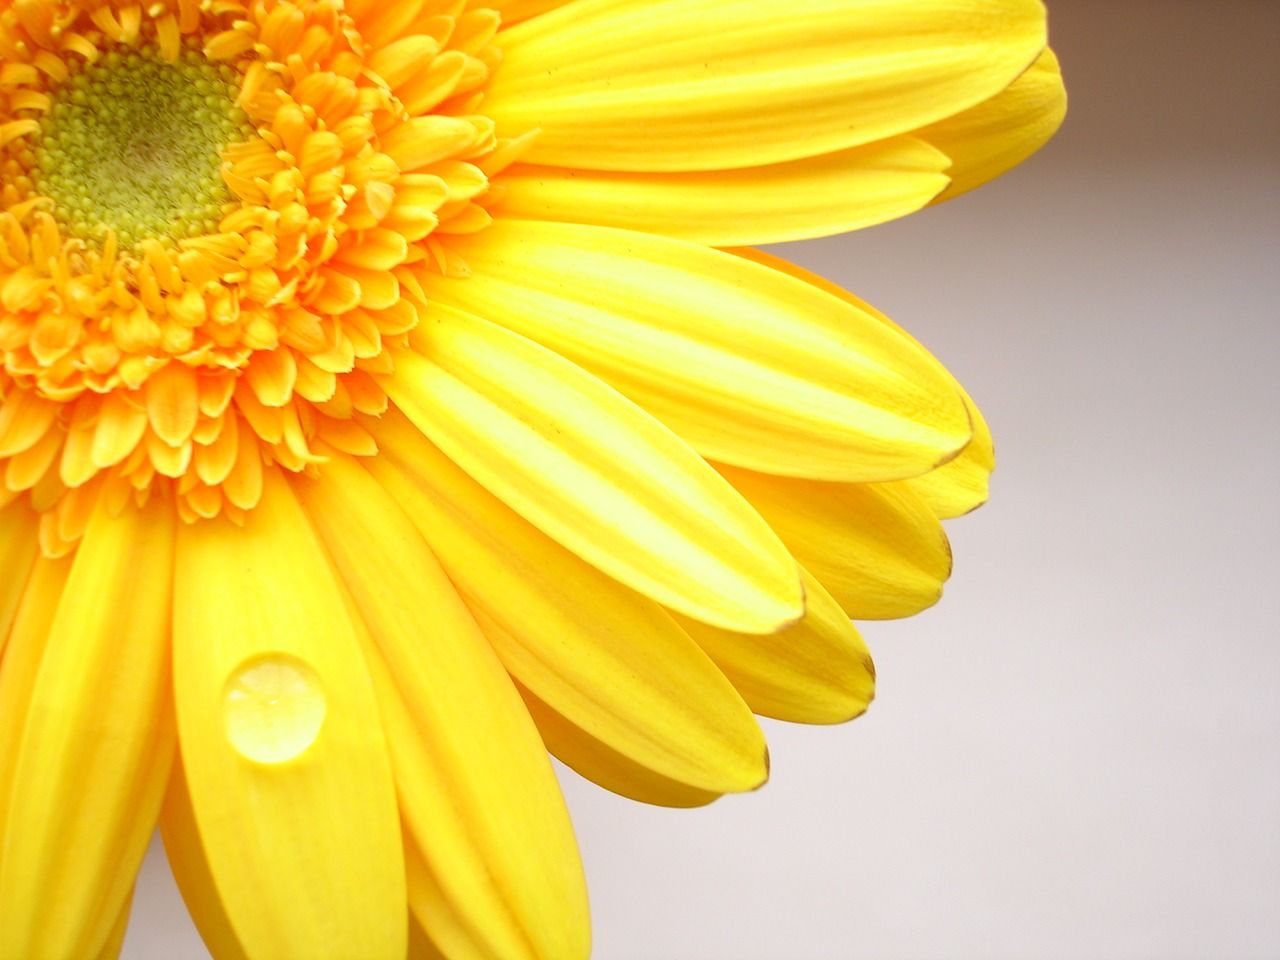 1280x960 Free Download Yellow Flowers Wallpaper Image Gallery 1280x960 For Your Desktop Mobile Tablet Explore Yellow Wallpaper Designs Yellow And Gray Wallpaper Designs Green And Yellow Wallpaper Blue And Yellow Wallpaper